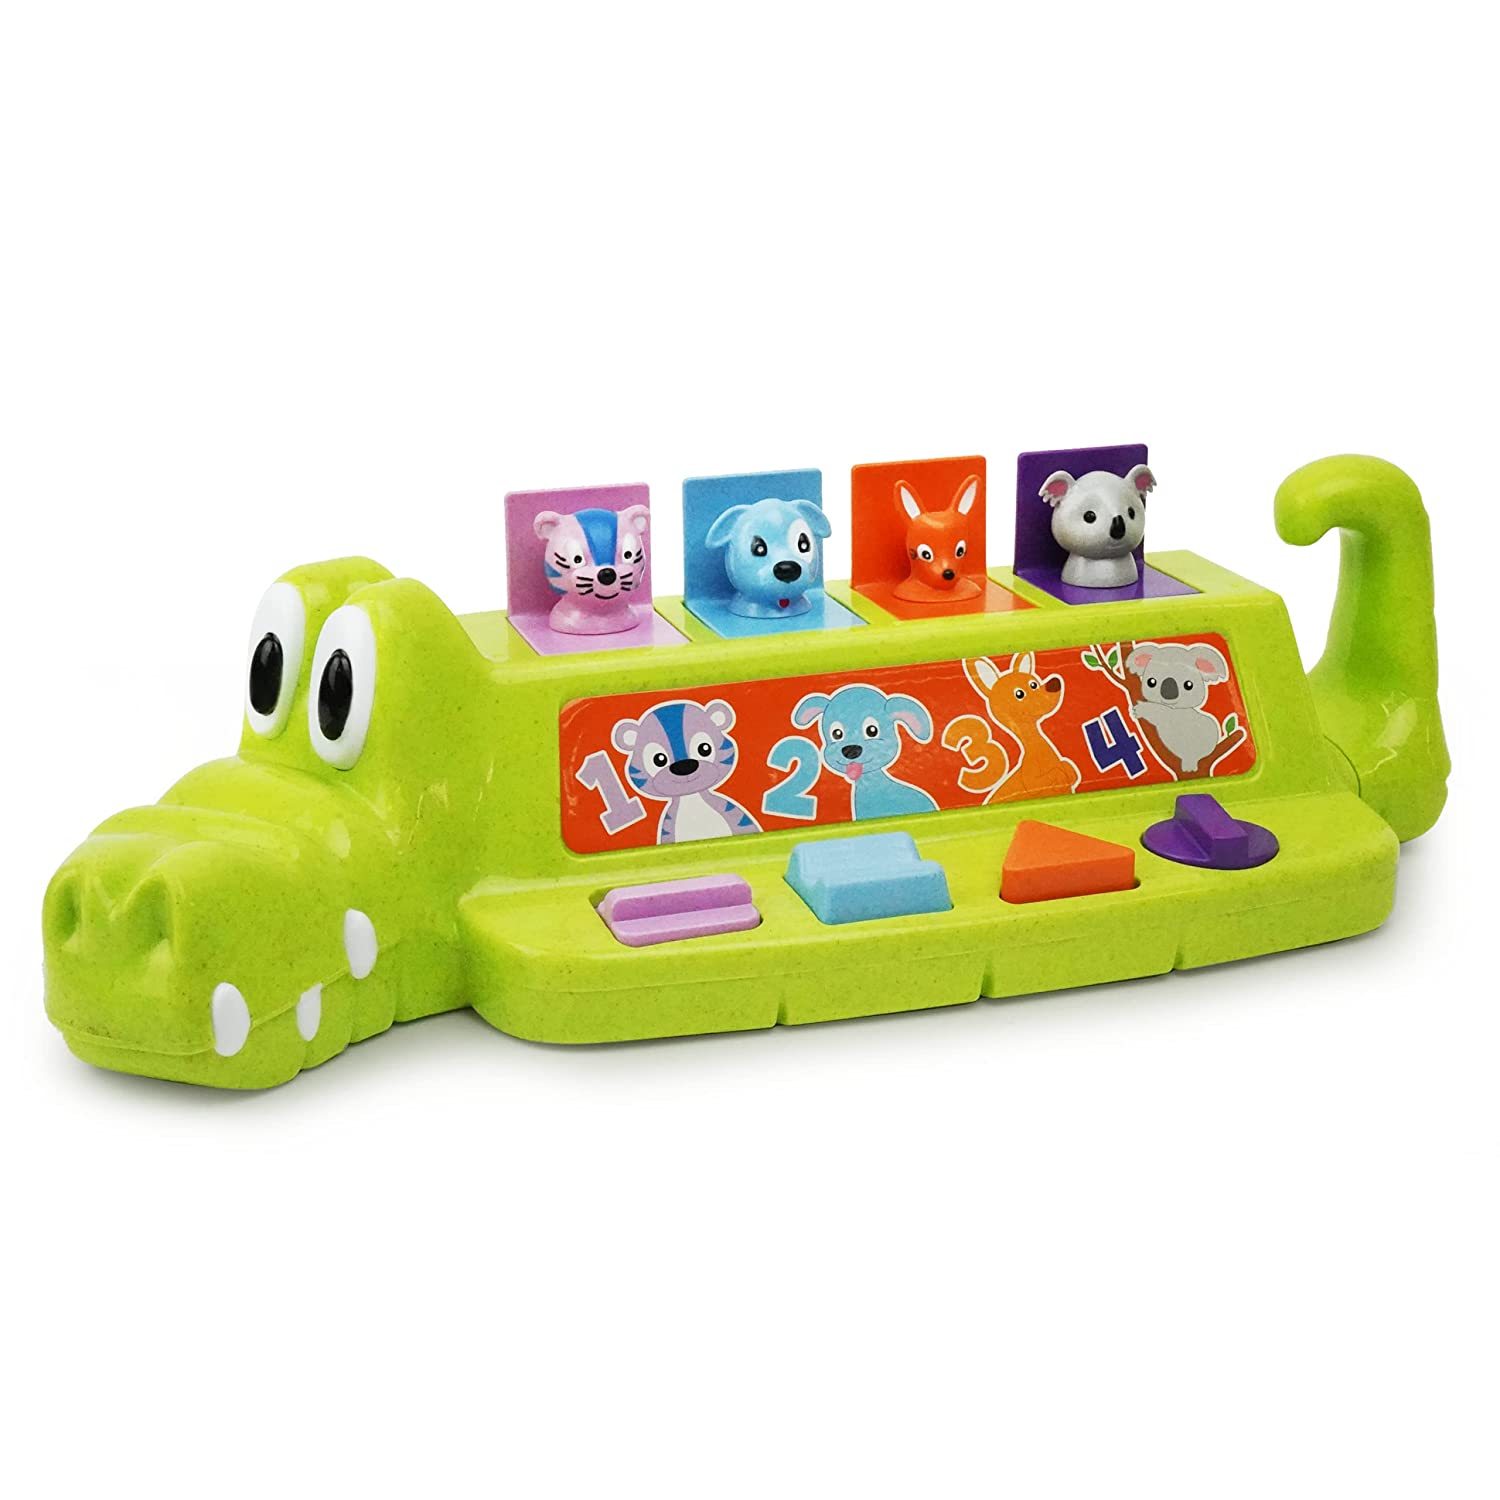 Primary image for Toddler Activity Center - Roo Crew Animal Alligator Interactive Learning Toy - L